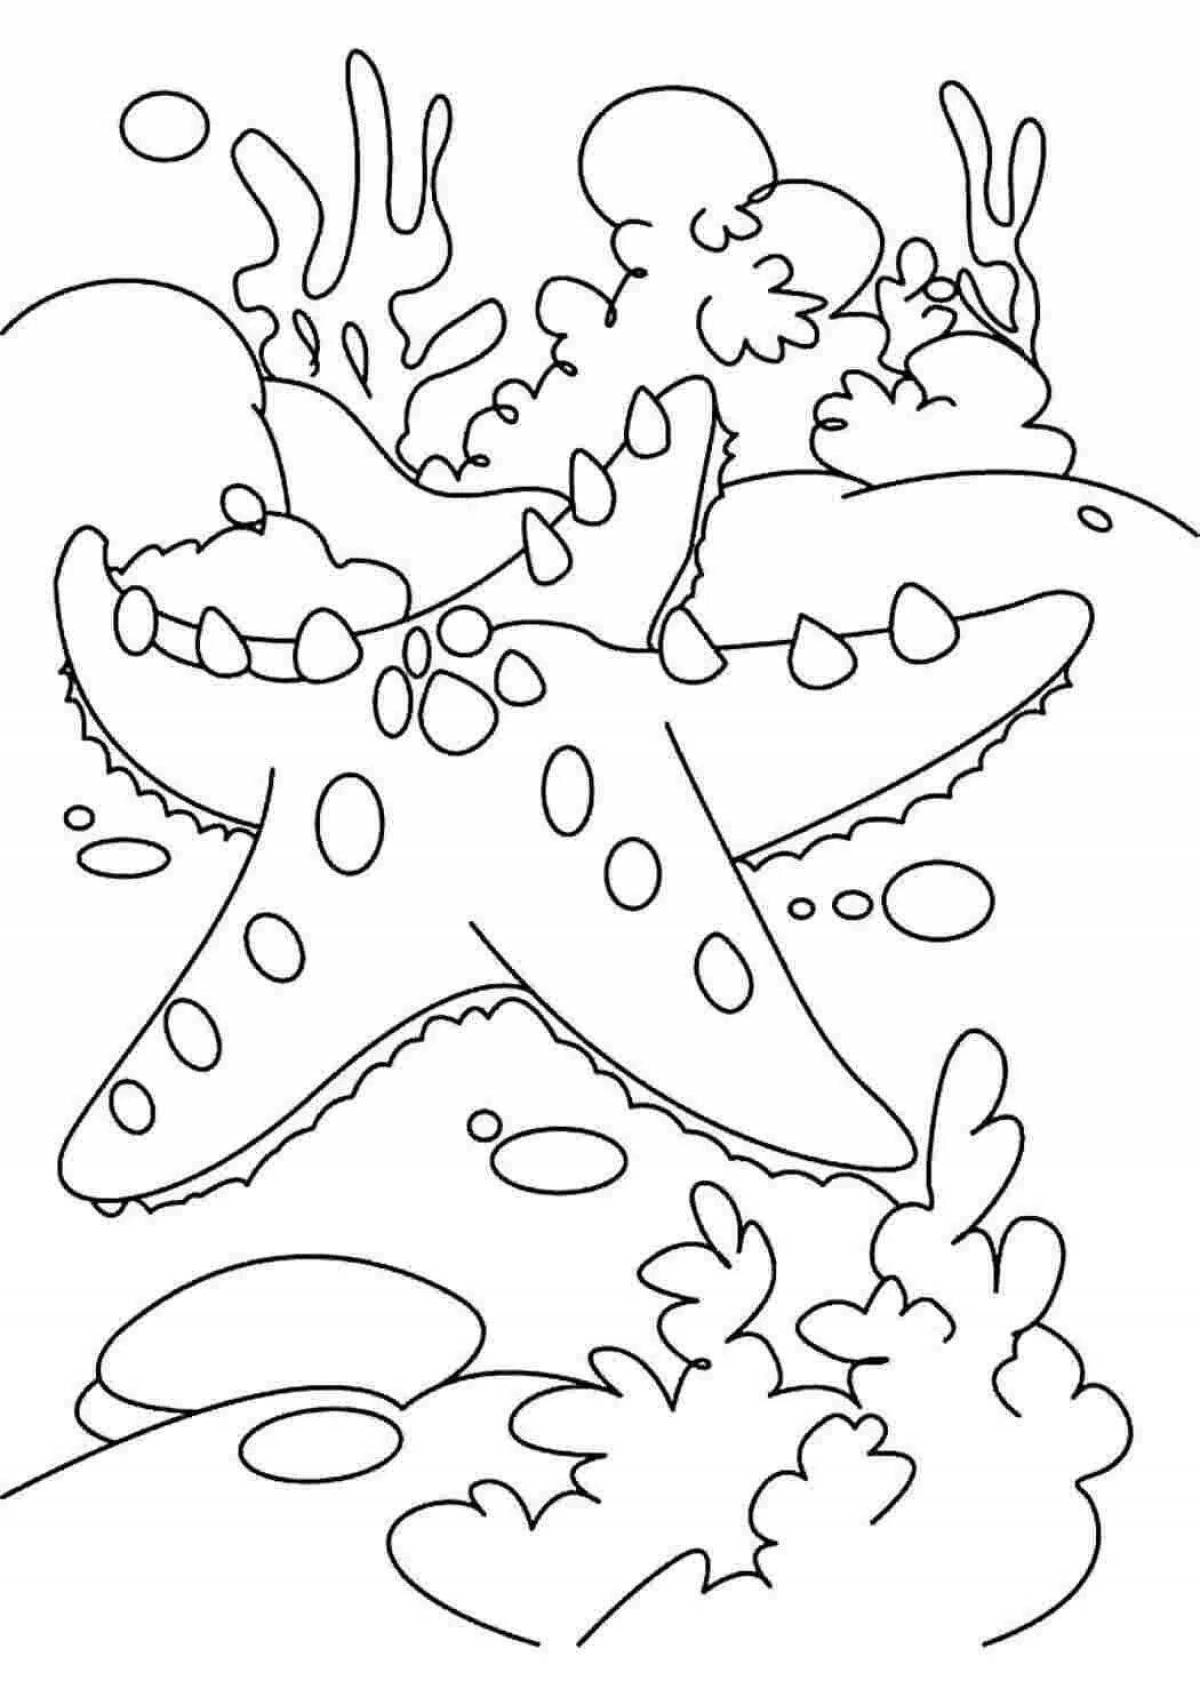 Exotic seabed coloring for kids